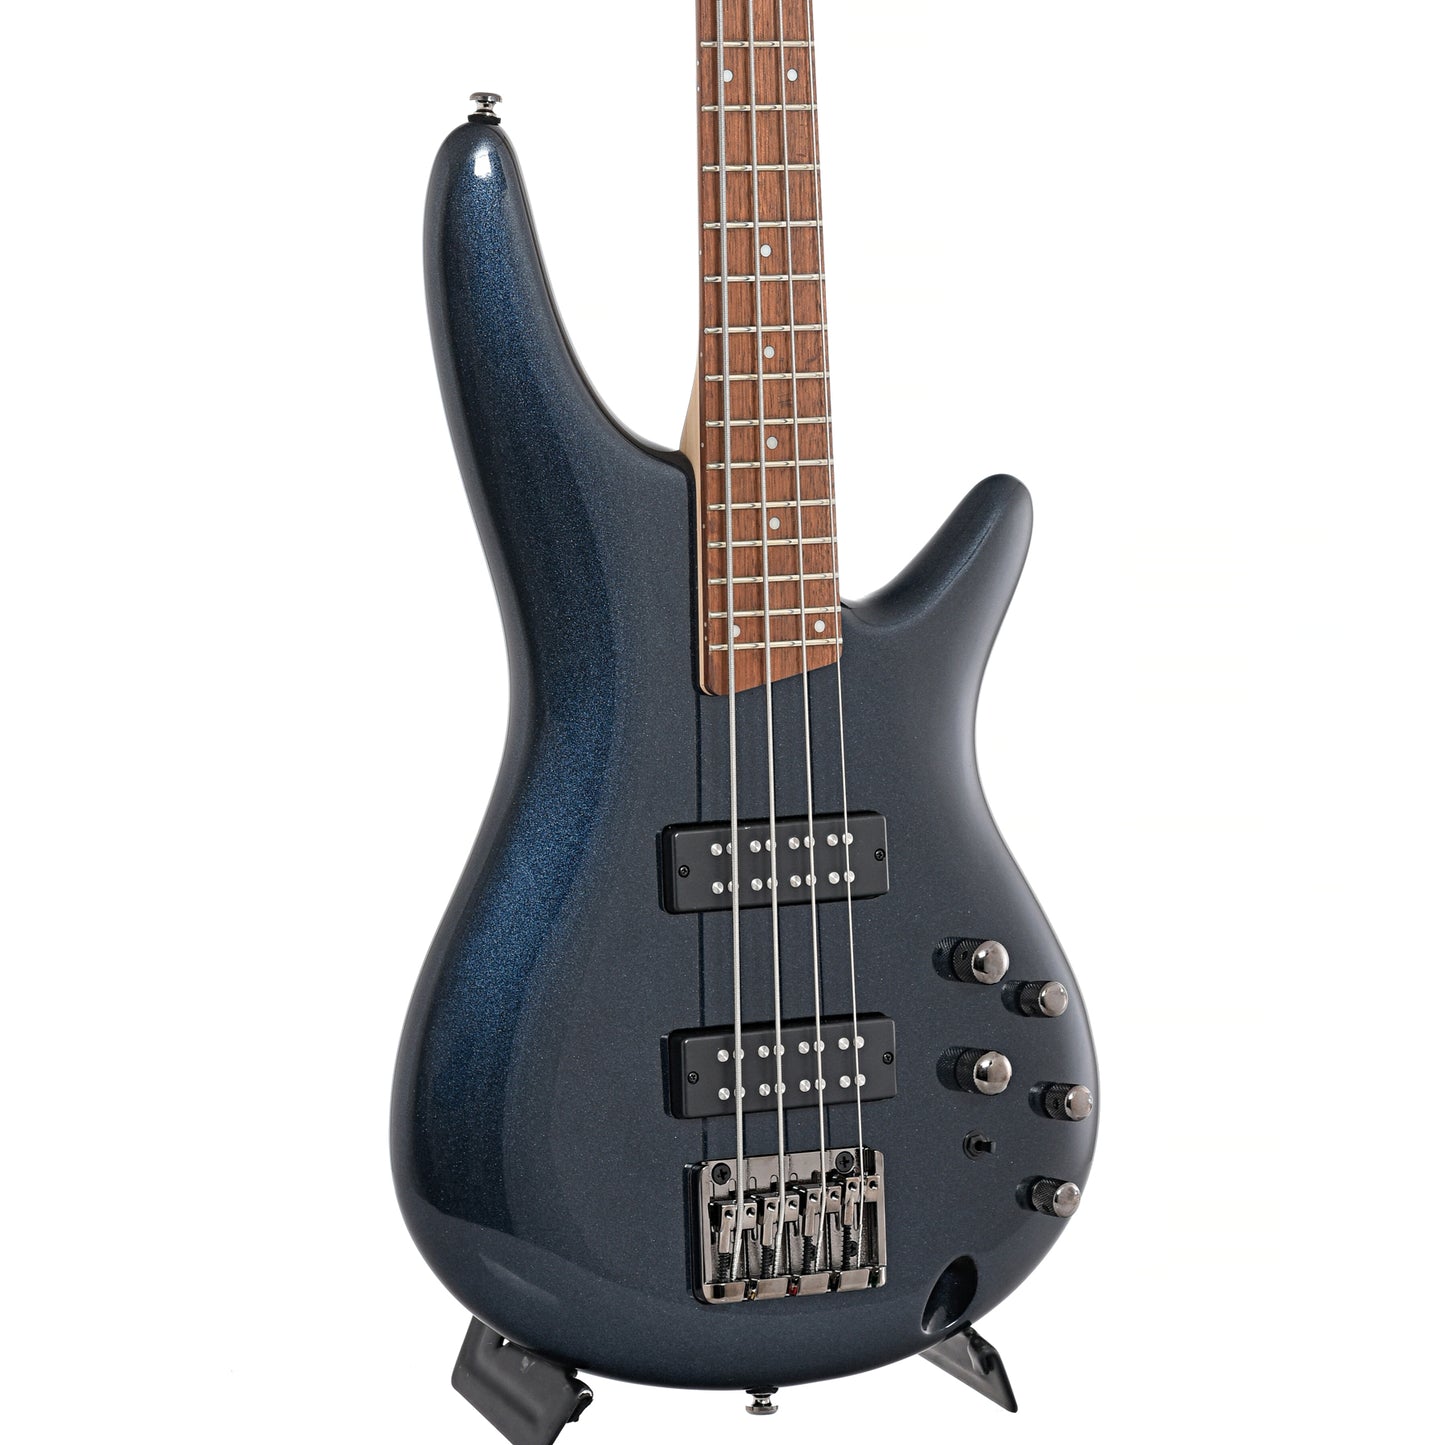 Image 3 of Ibanez SR300E 4-String Bass, Iron Pewter- SKU# SR300E-IPT : Product Type Solid Body Bass Guitars : Elderly Instruments